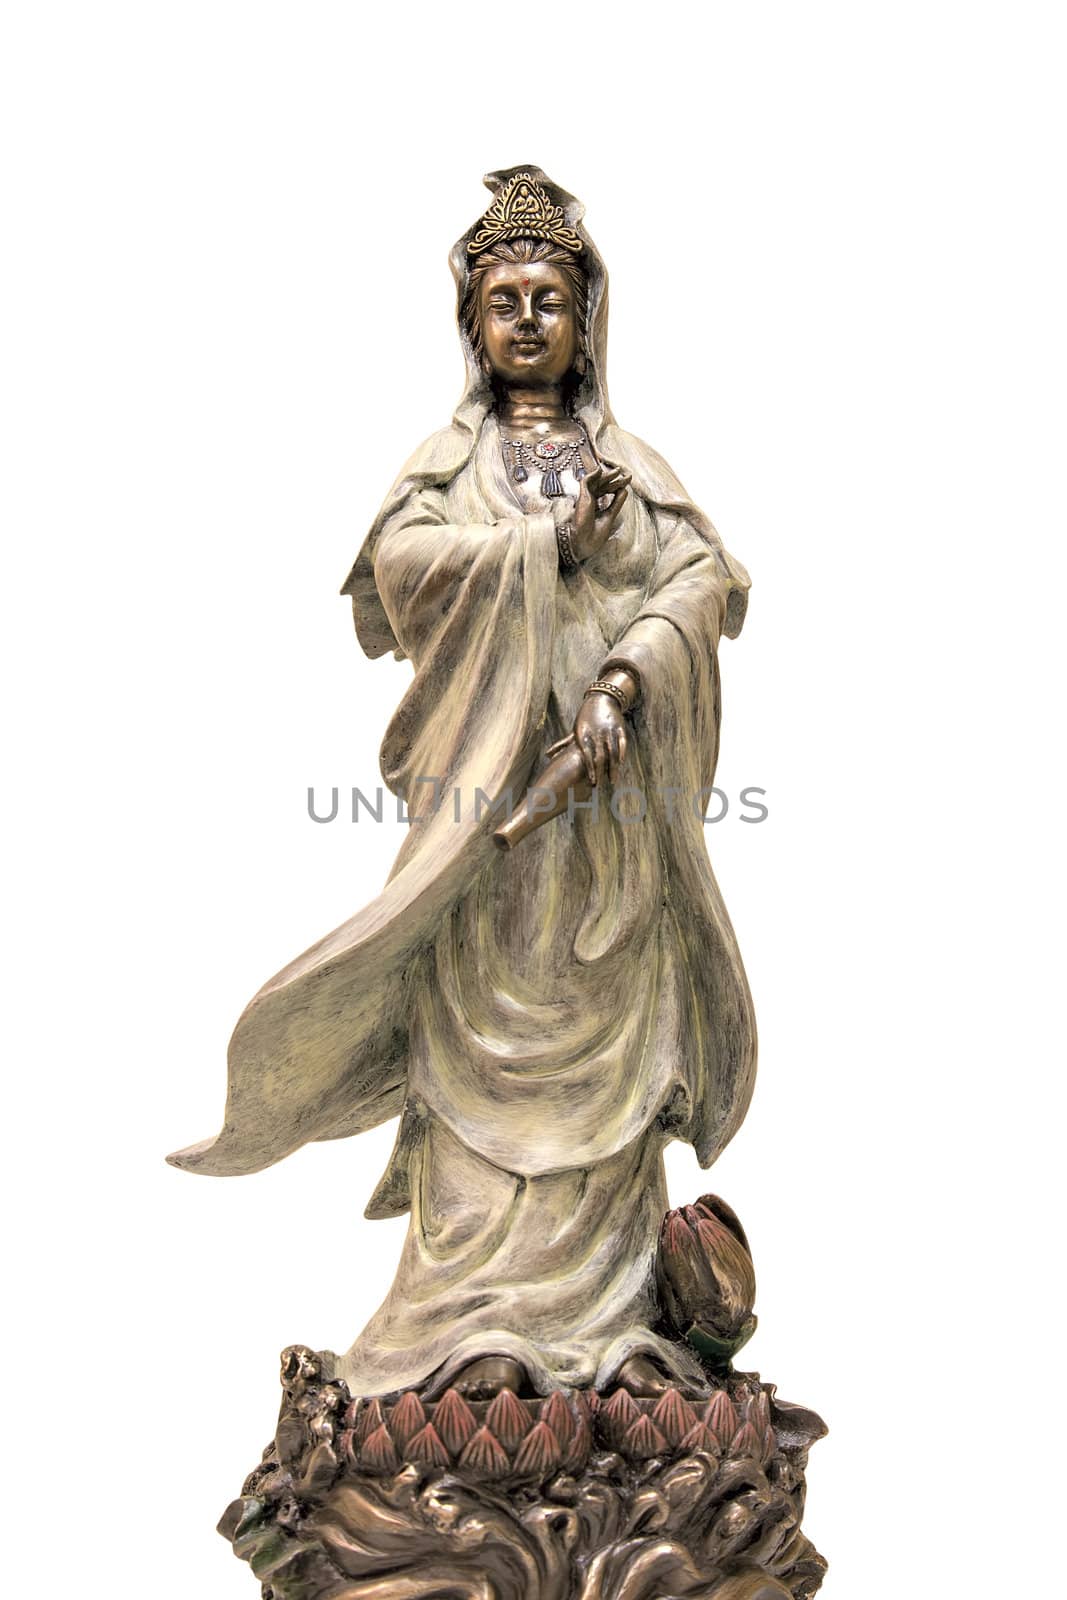 Kuan Yin Goddess of Compassion Bronze Statue Standing on Lotus Flower Isolated on White Background